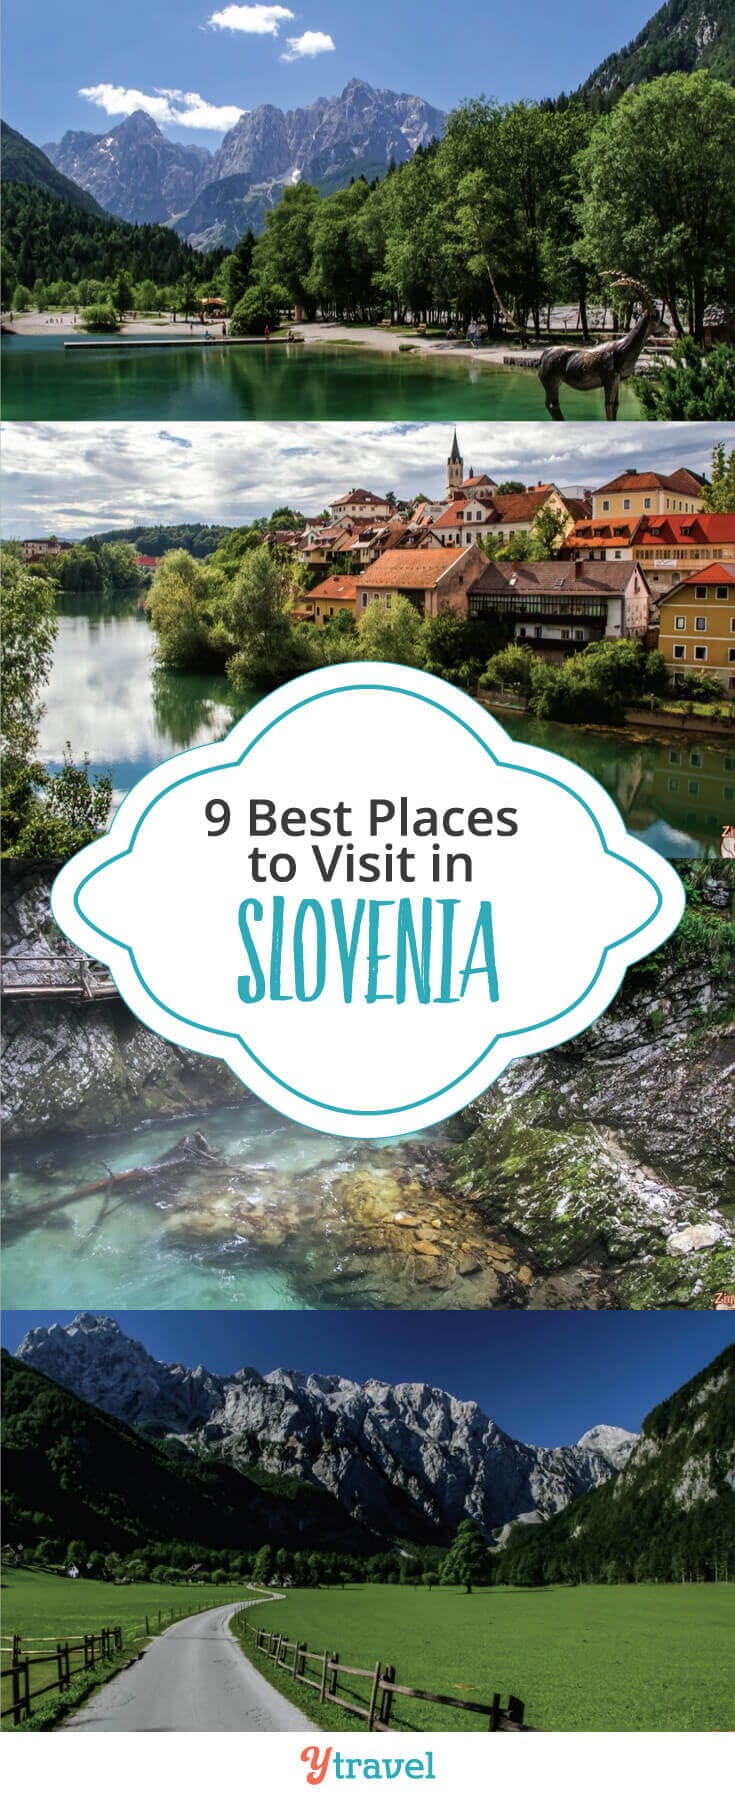 Looking for Slovenia travel tips? Wondering what are the best places to visit in Slovenia? Check out this list of the 9 best things to do in Slovenia that will have you inspired to plan your next trip to Slovenia. #Europe #EuropeTrip #Slovenia